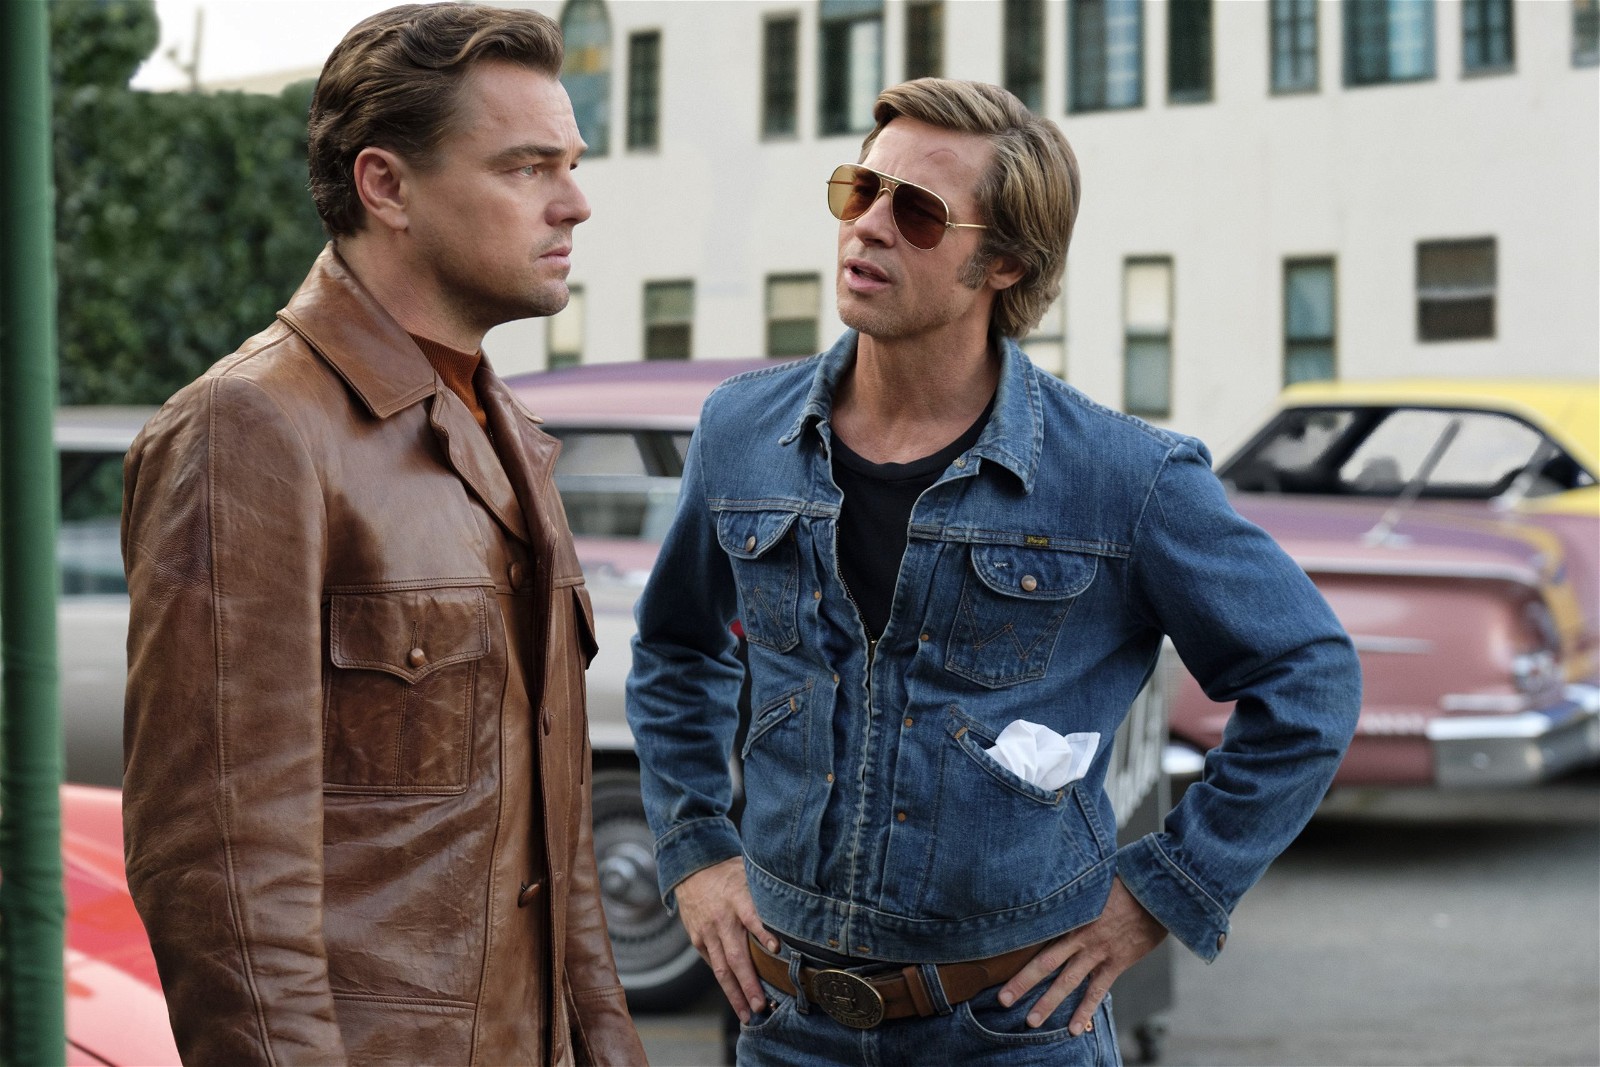 Leonardo DiCaprio and Brad Pitt in a still from Once Upon A Time... In Hollywood